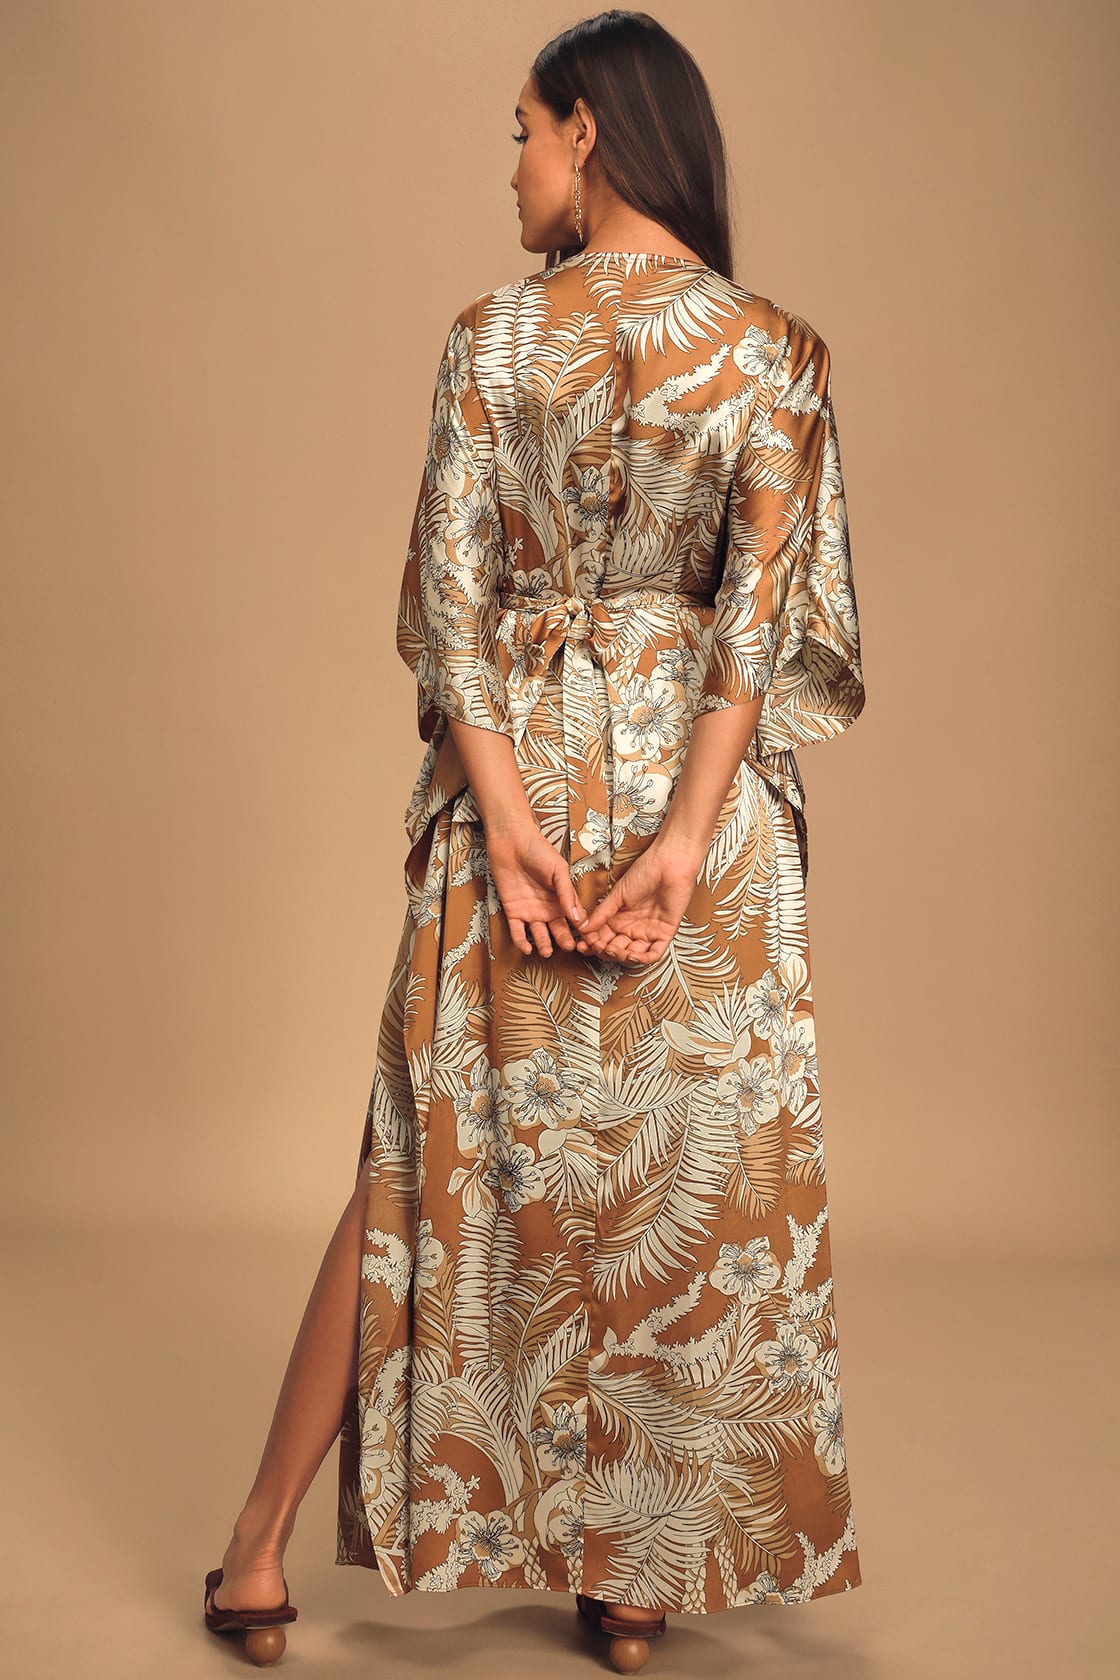 Brown Floral Print Maxi Dress for Wedding Guest Outfit in Hawaii